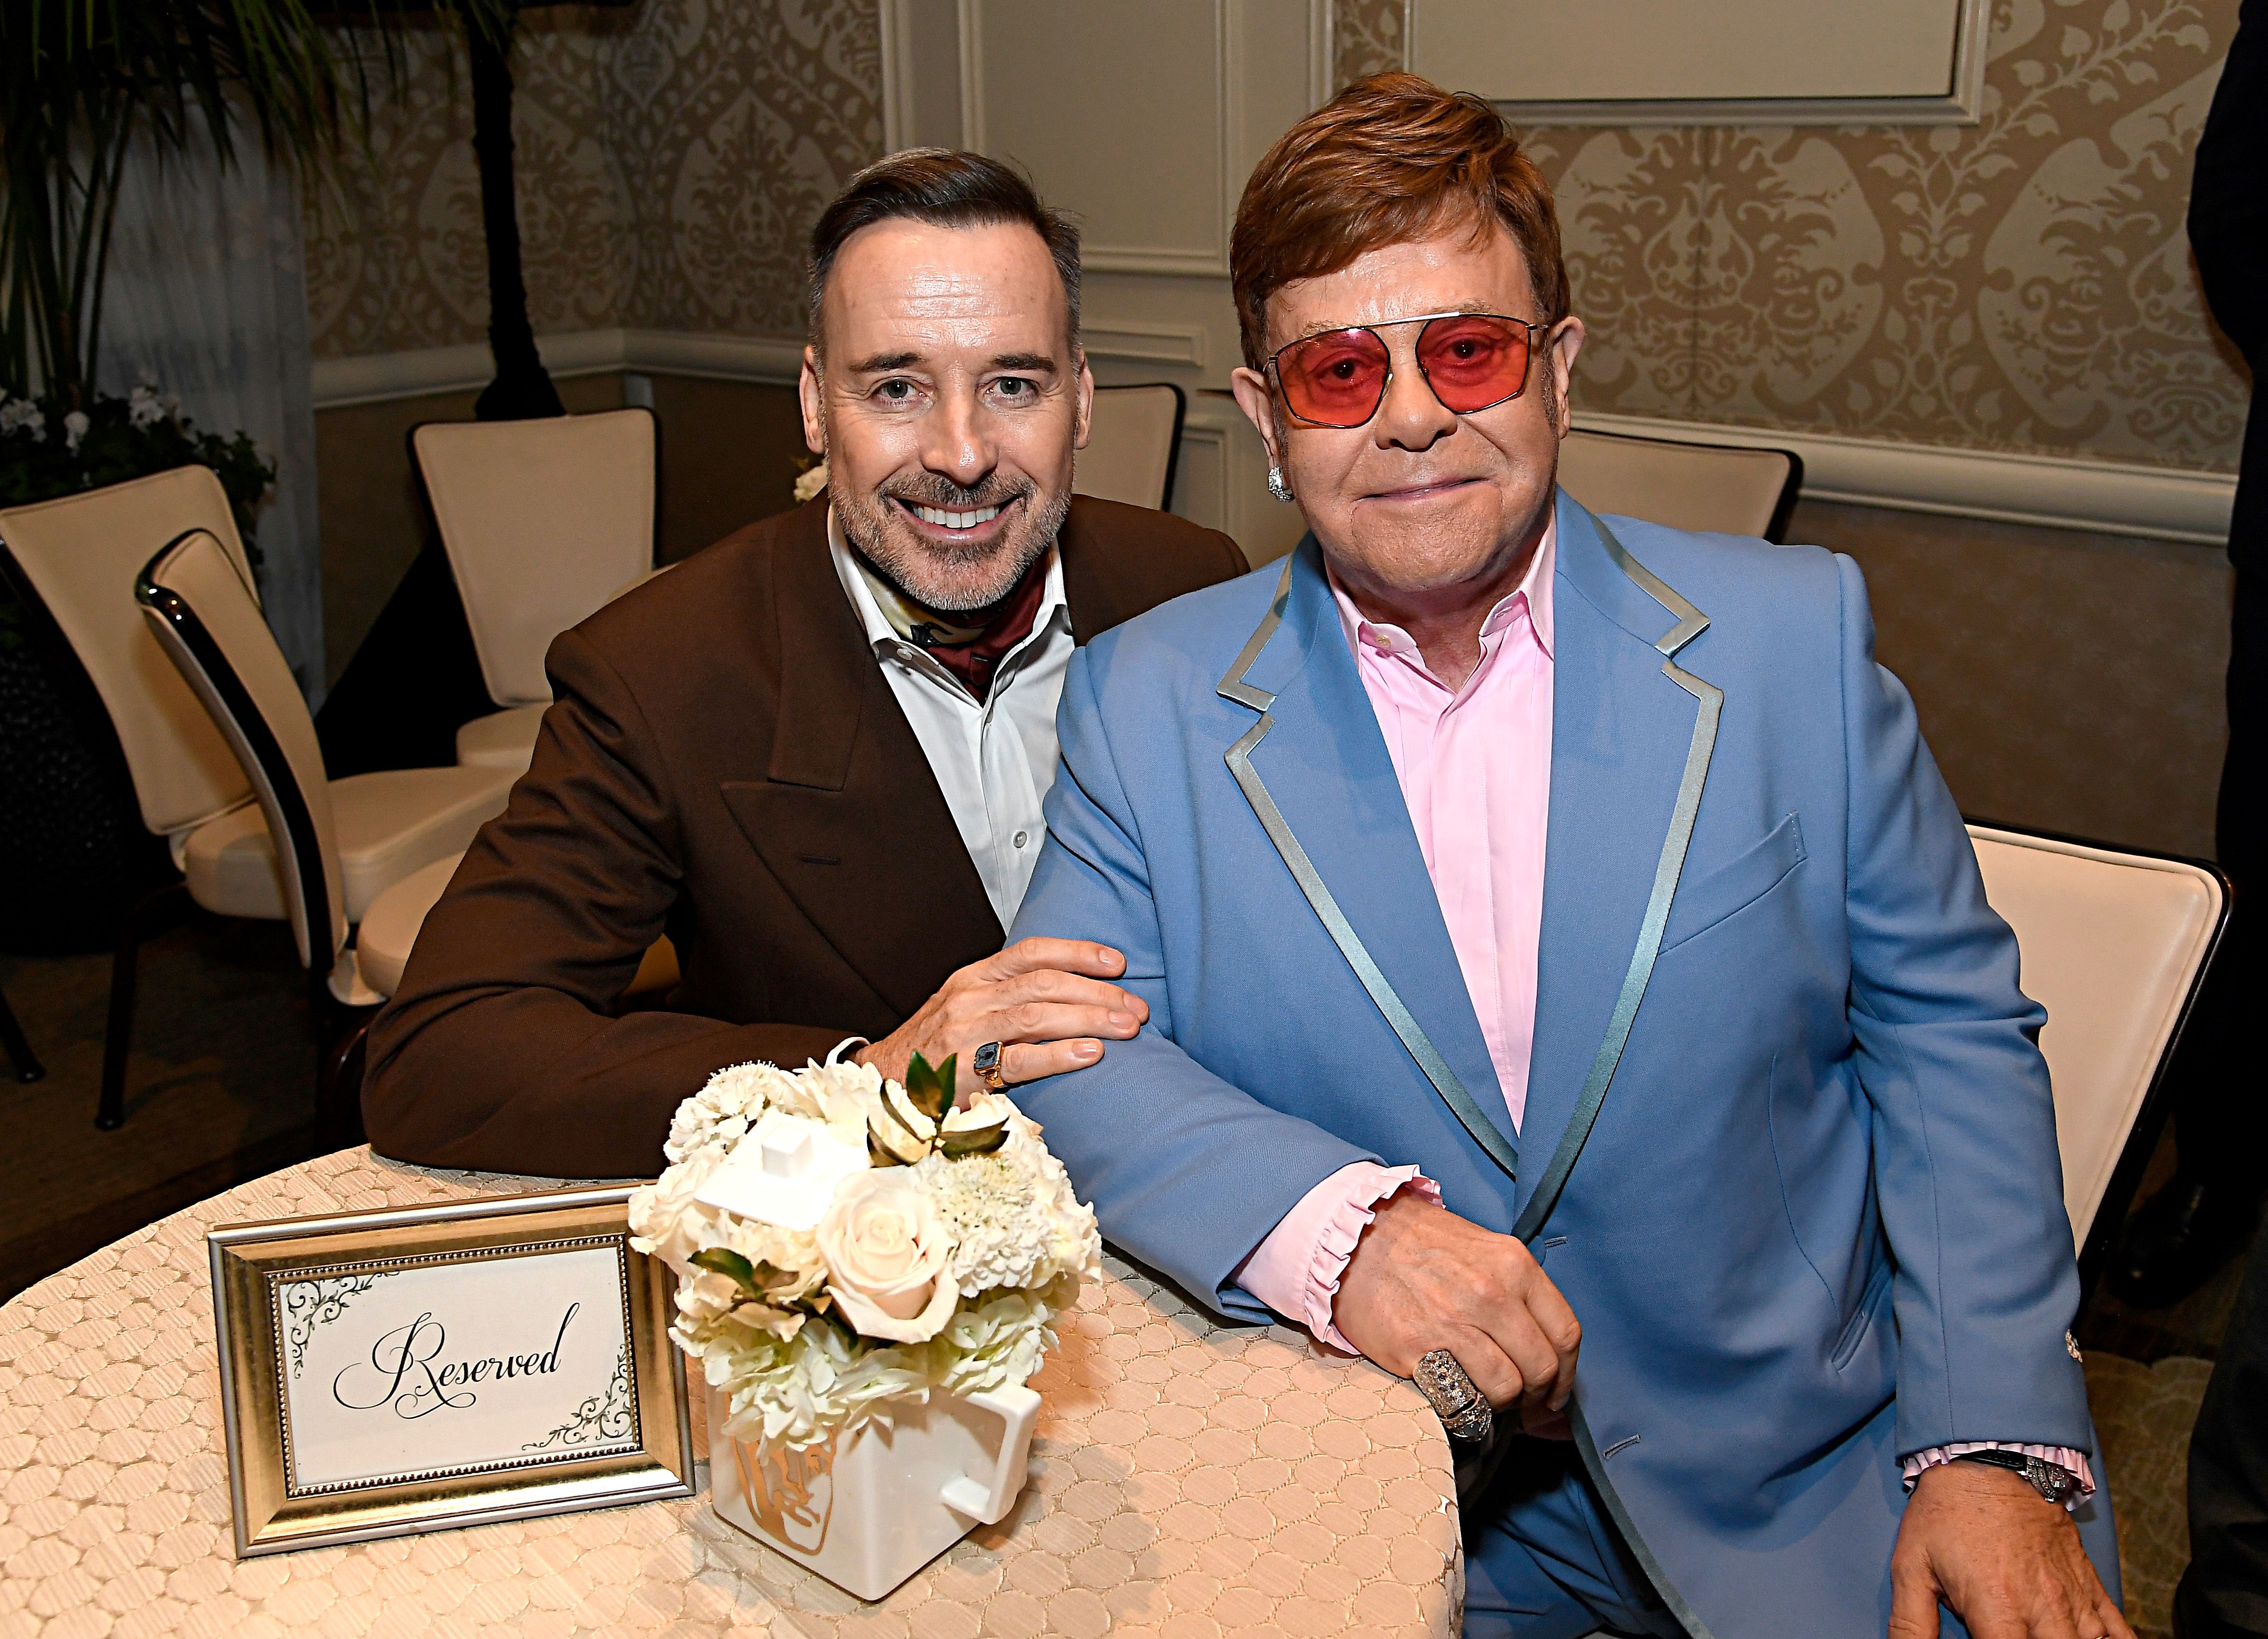 David Furnish and Elton John during the BAFTA Los Angeles Tea Party at Four Seasons Hotel Los Angeles at Beverly Hills on January 4, 2020, in Los Angeles, California. | Source: Getty Images